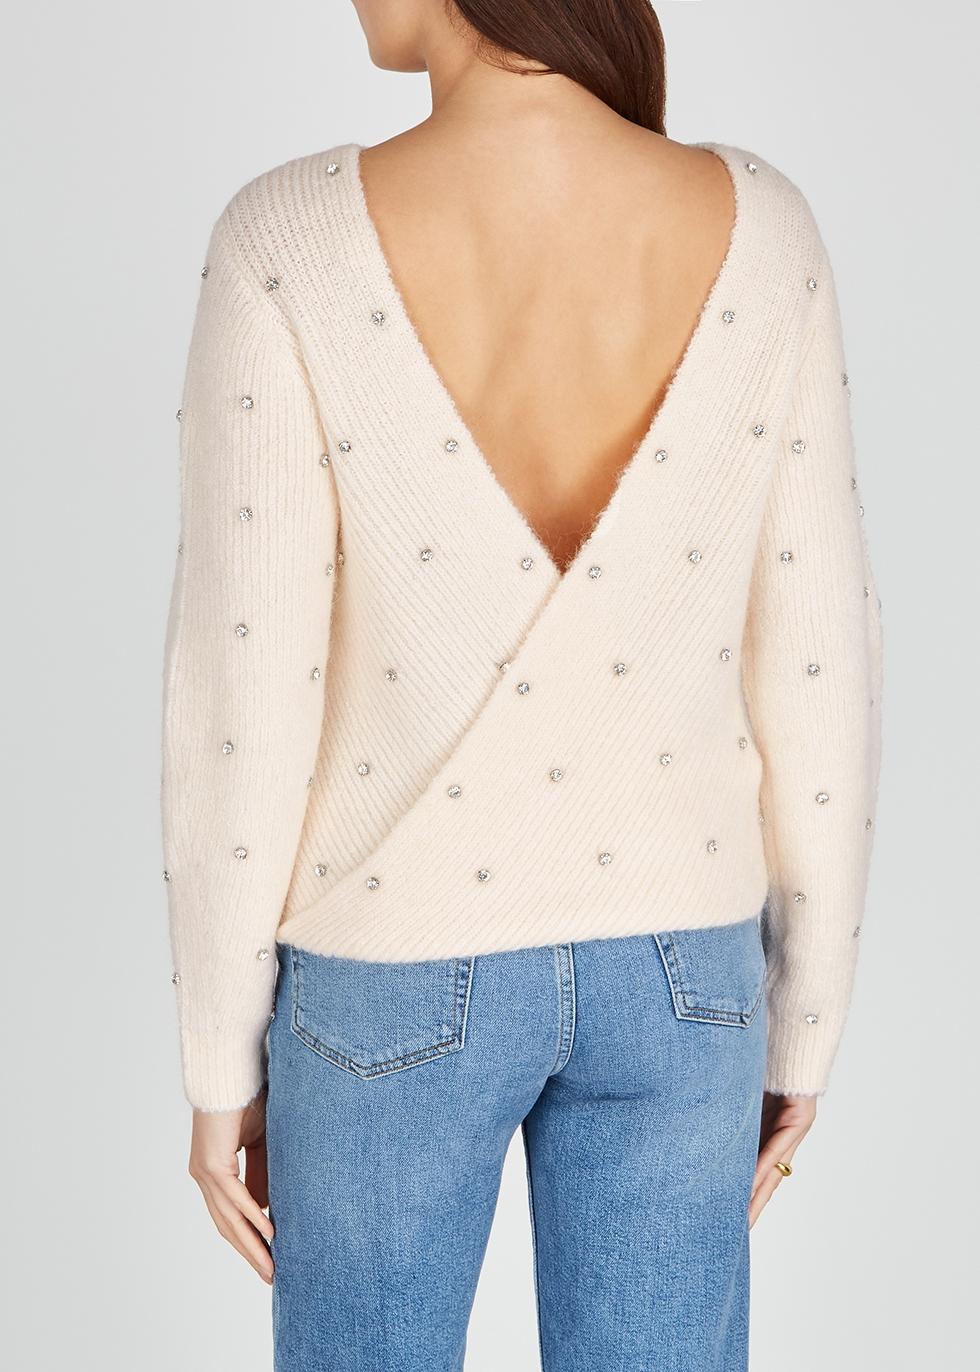 Self-Portrait Synthetic Blush Crystal-embellished Knitted Jumper in